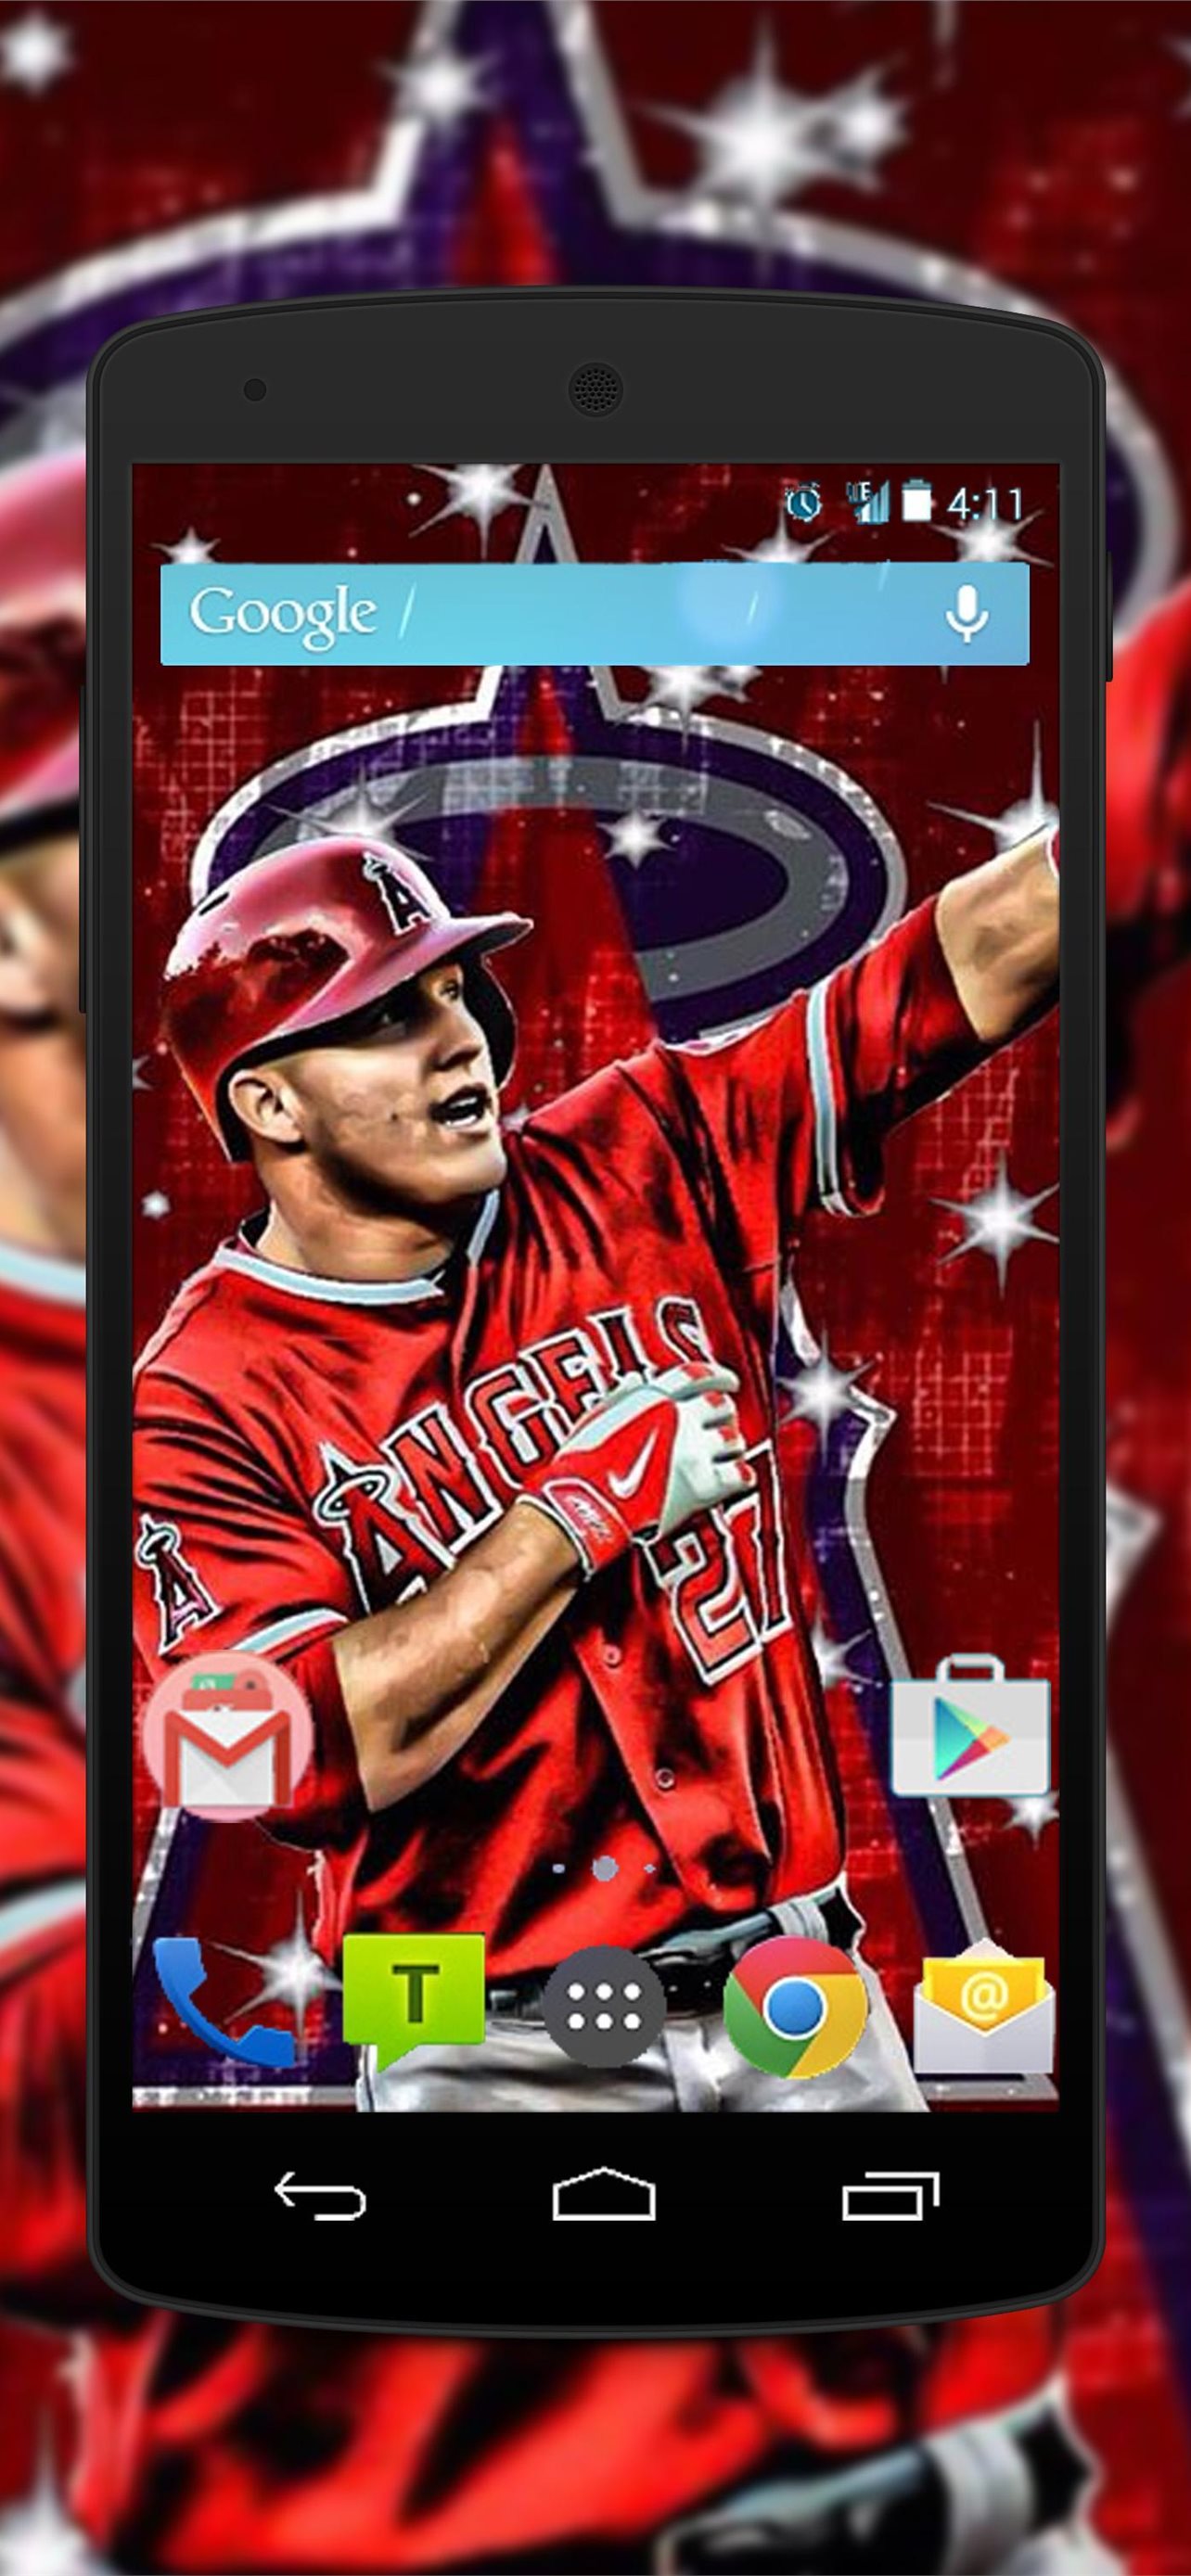 Mike Trout Iphone Wallpaper  Mlb wallpaper, Mike trout, Baseball wallpaper